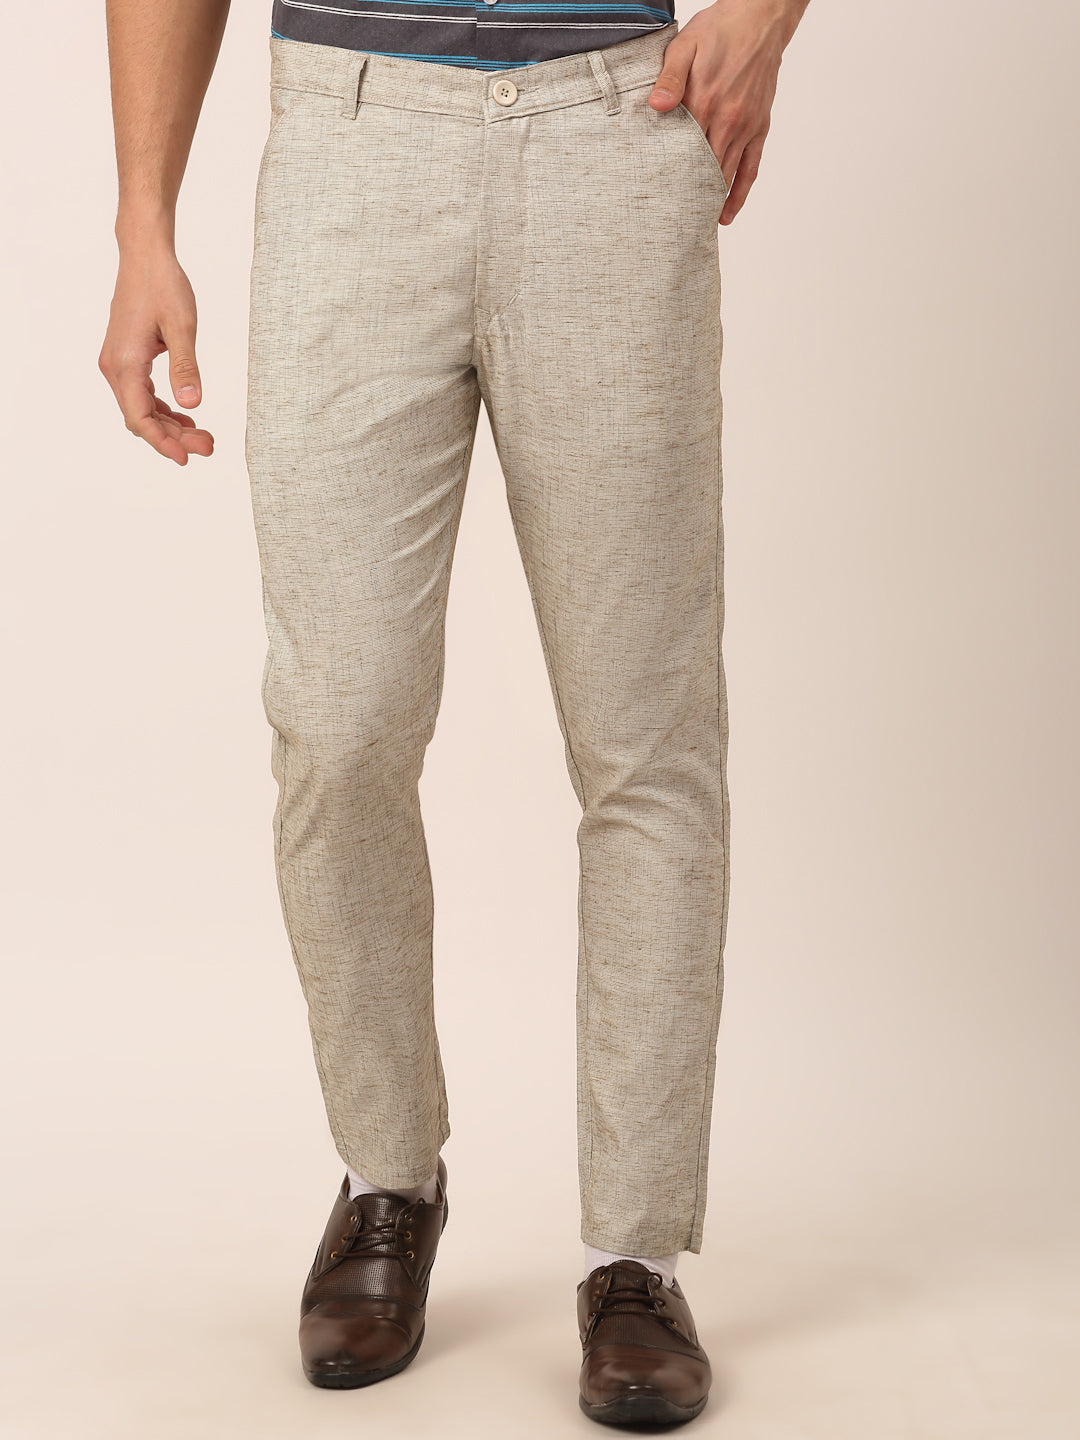 Buy Indian Terrain Men's White Cotton Slim Fit Casual Trousers at Amazon.in